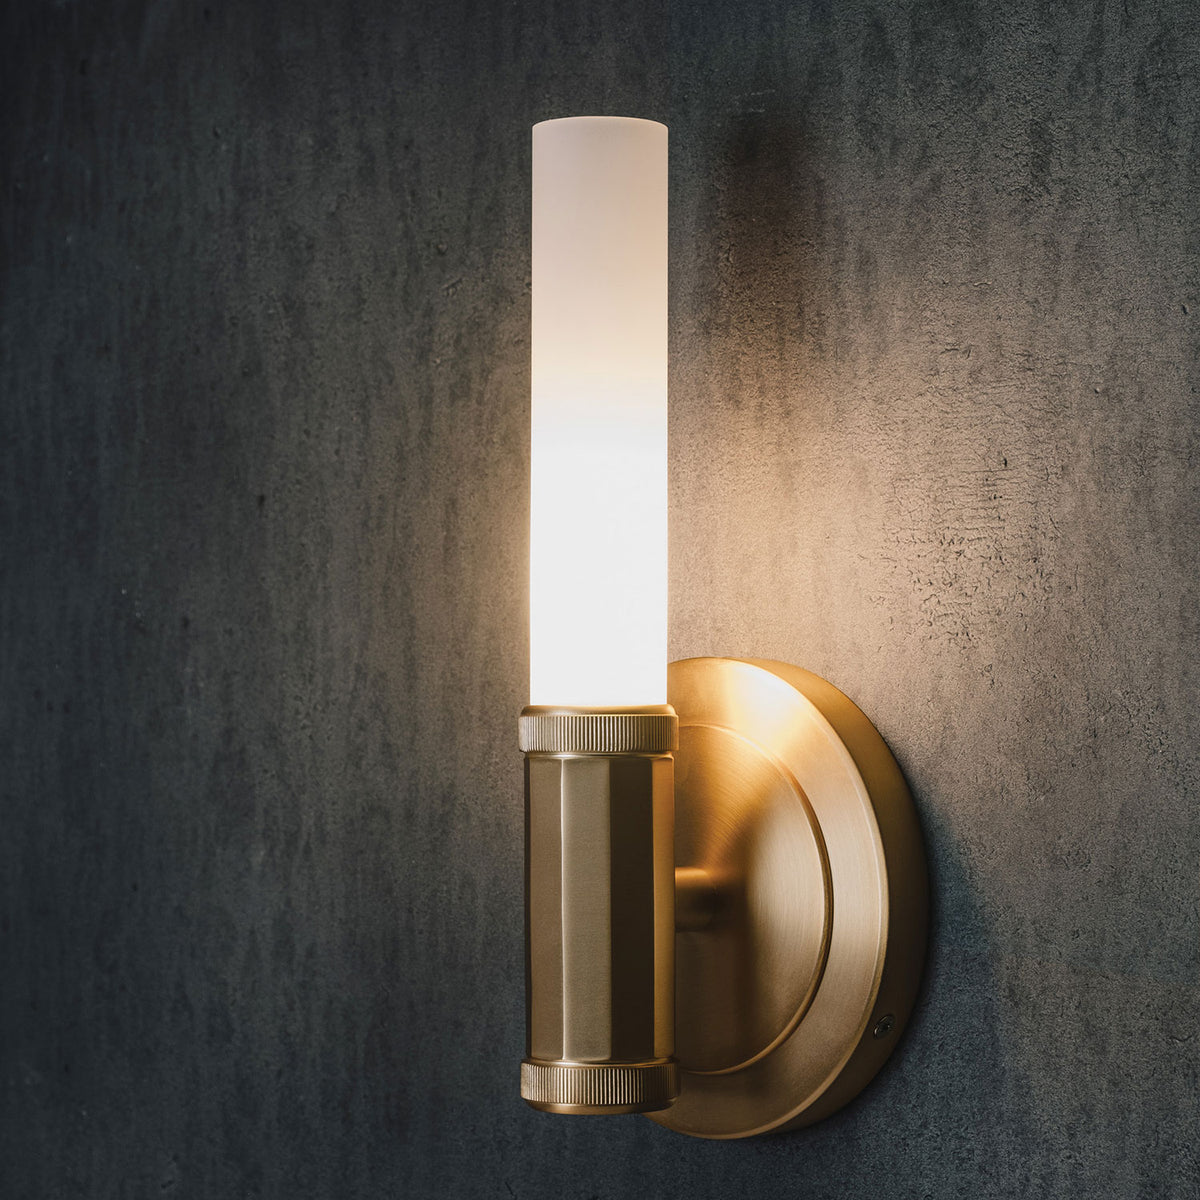 Elemental Tee Sconce image 3 of 6